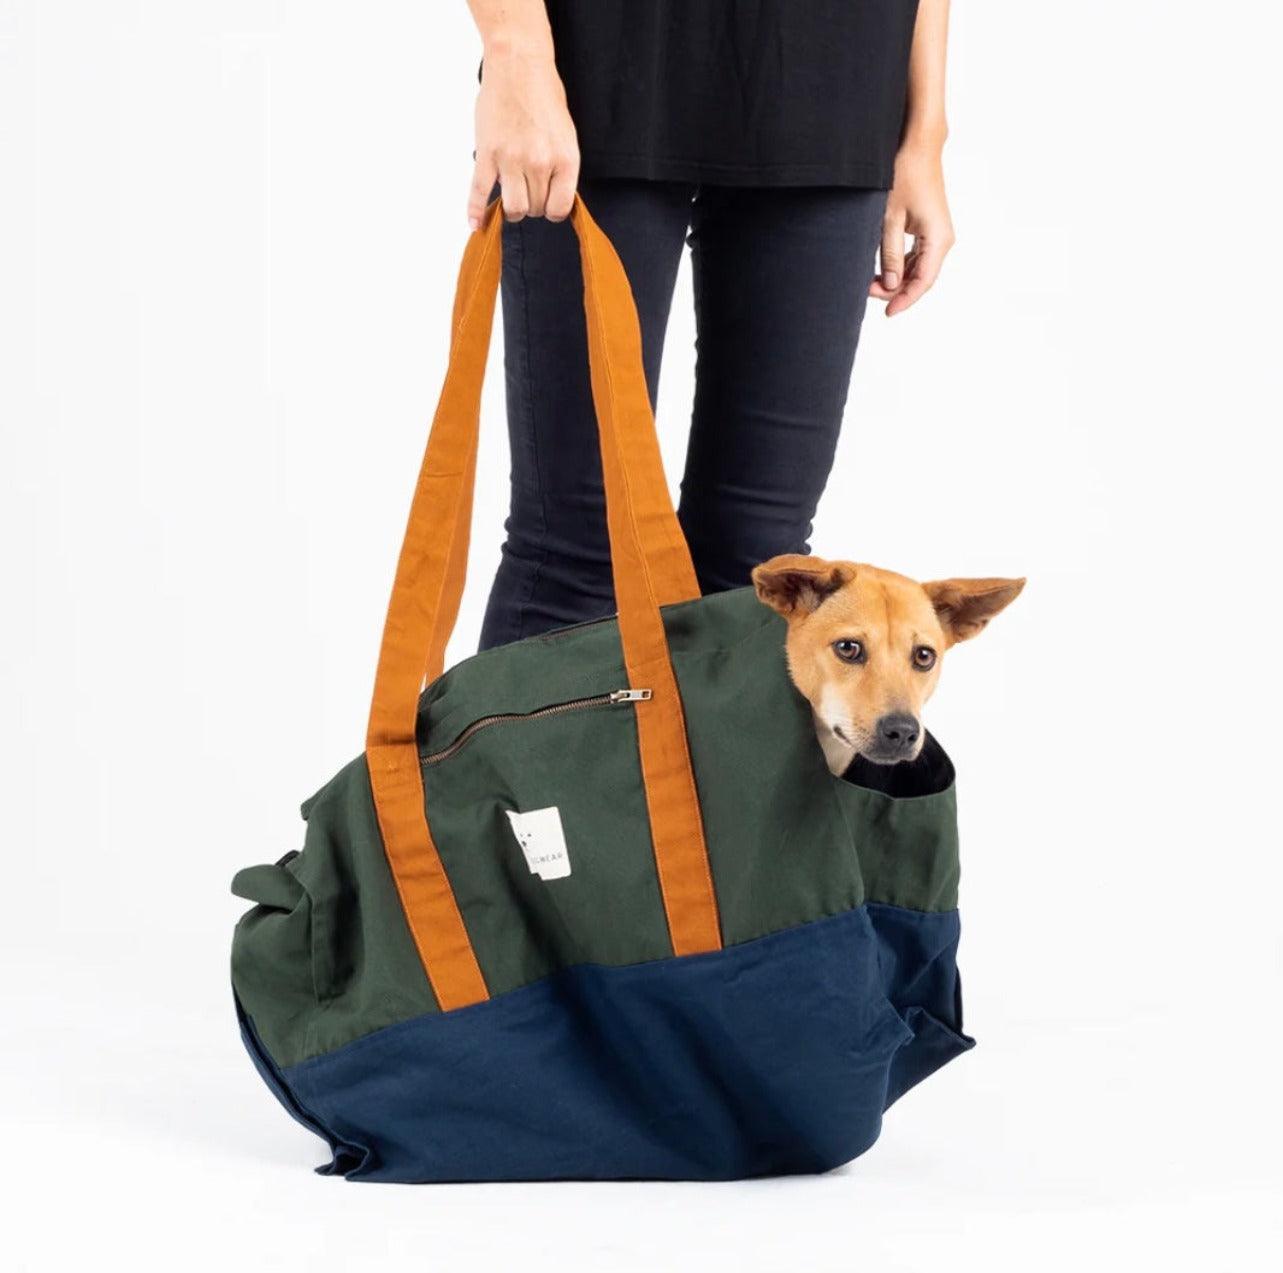 Dog Carrier - Expat Life Style